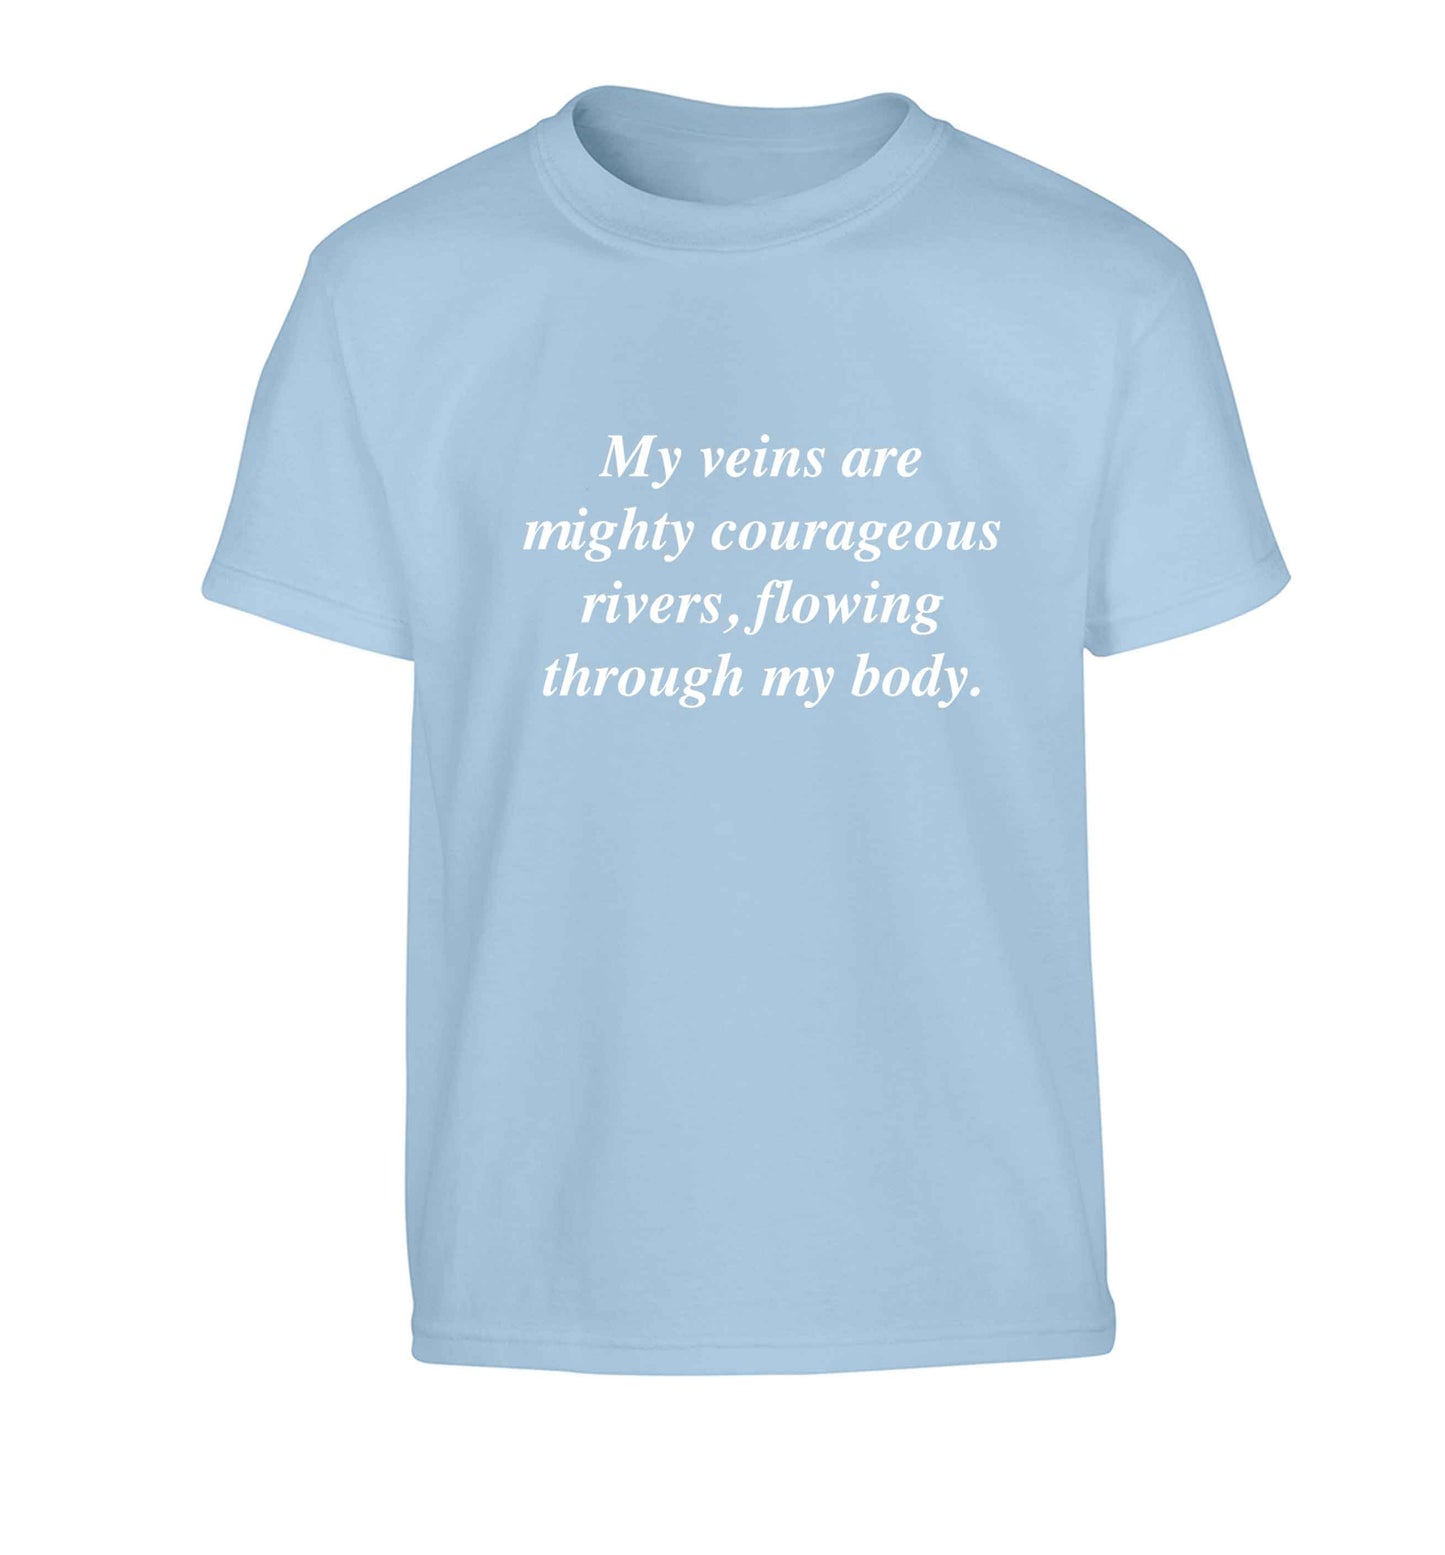 My veins are mighty courageous rivers, flowing through my body Children's light blue Tshirt 12-13 Years